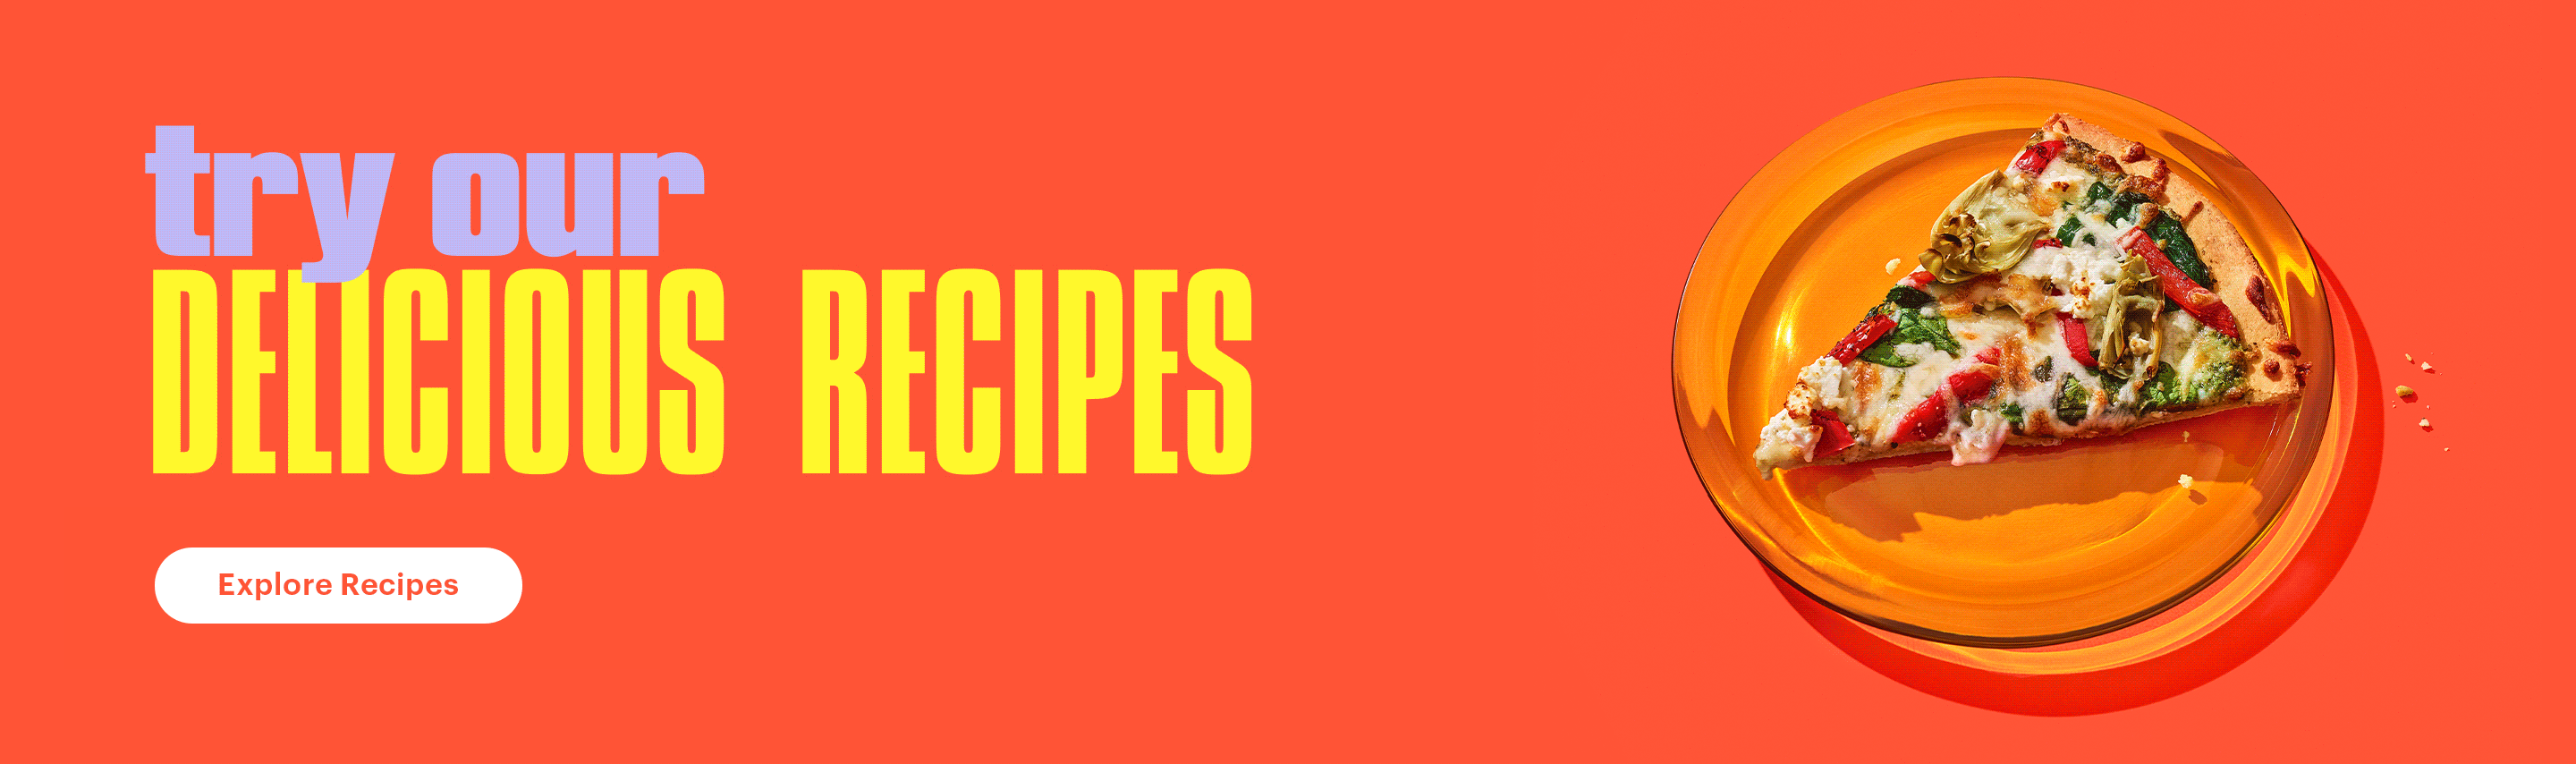 Try our delicious recipes. Explore Recipes.